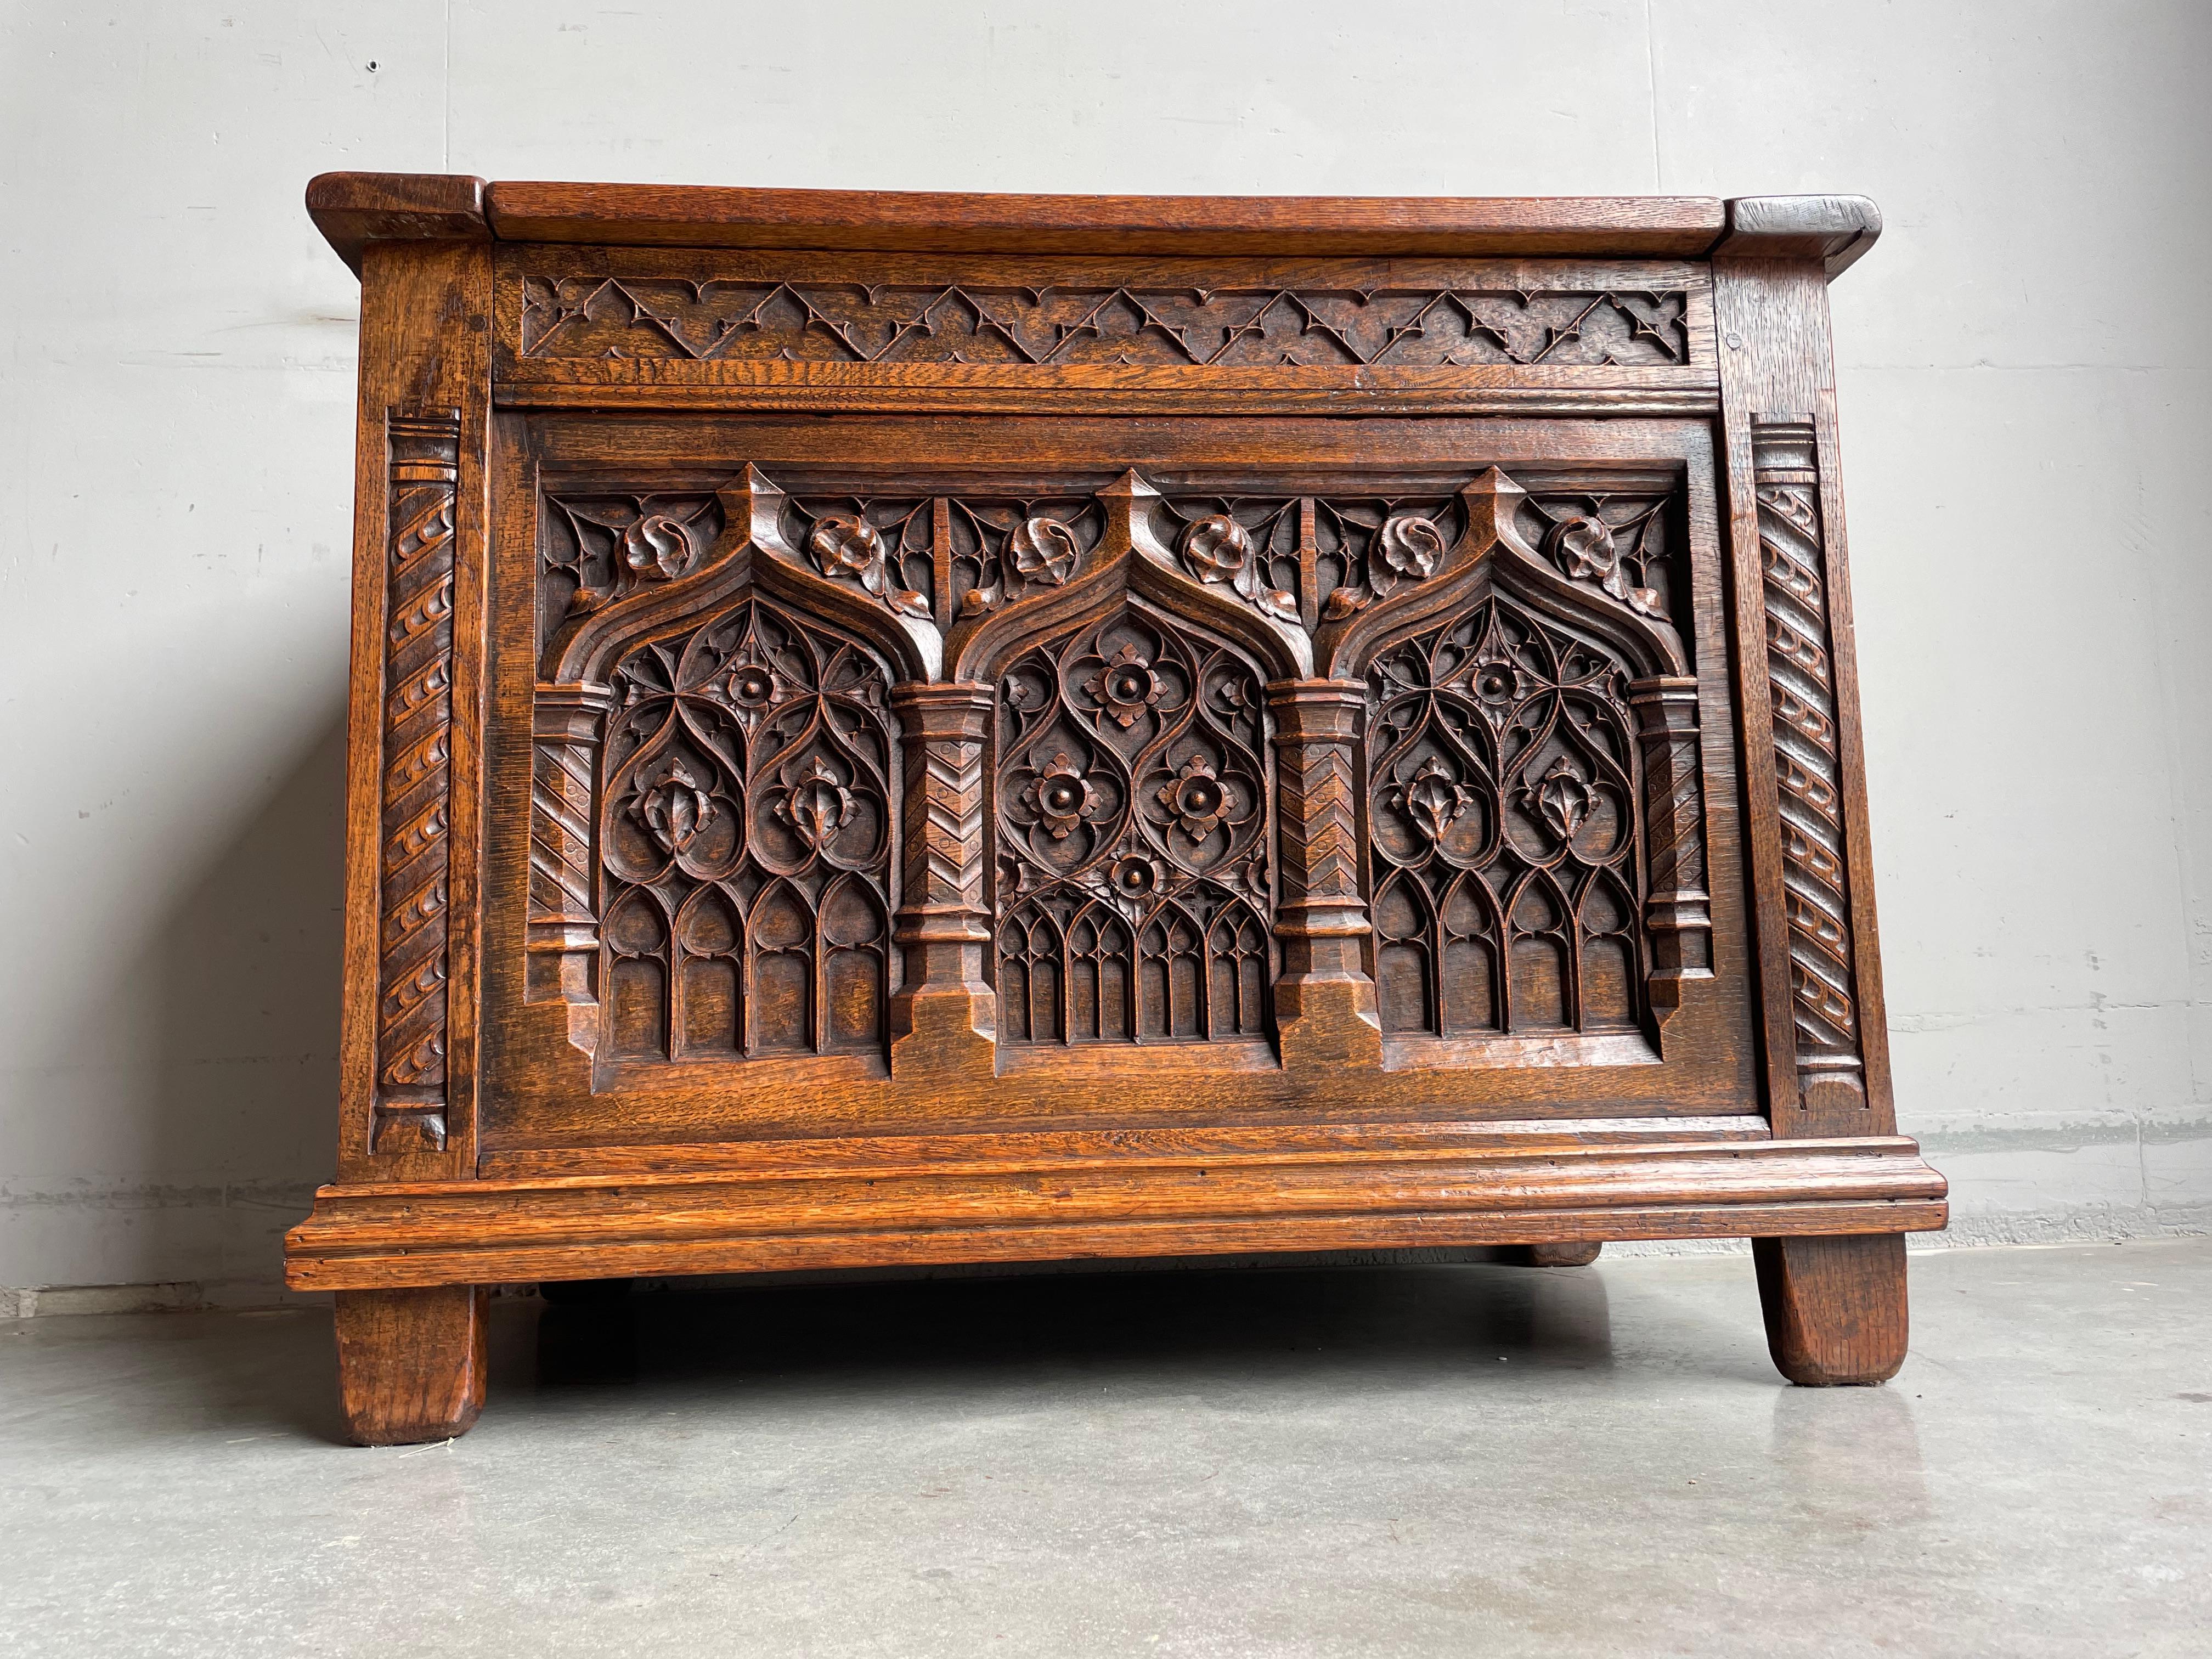 Hand-Carved Rare Size Antique Gothic Revival Hand Carved Oak Chest / Trunk with Warm Patina